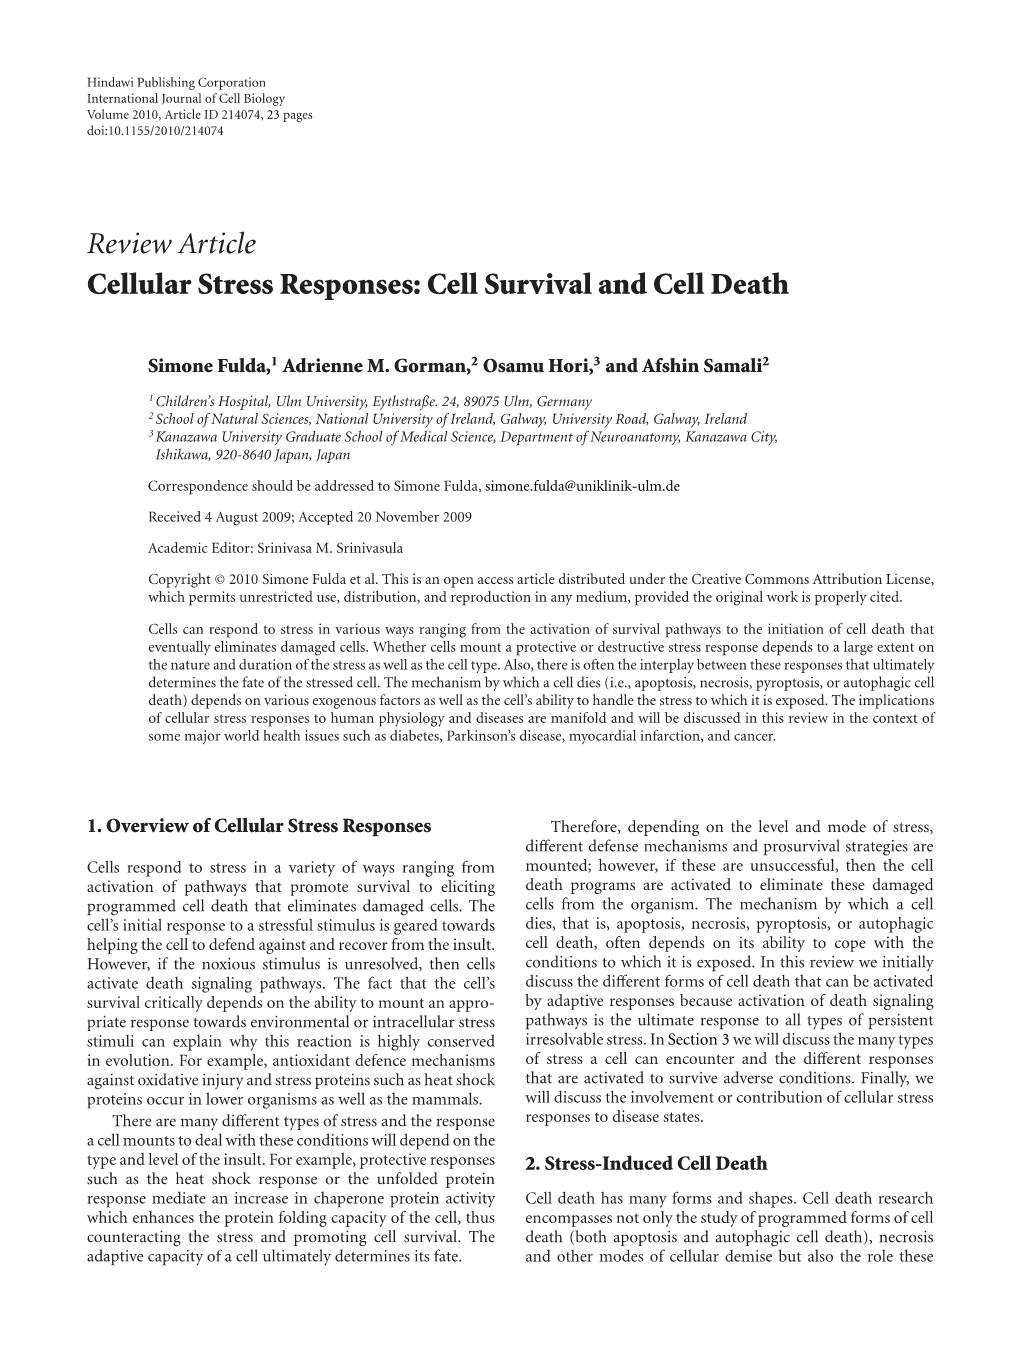 Cellular Stress Responses: Cell Survival and Cell Death